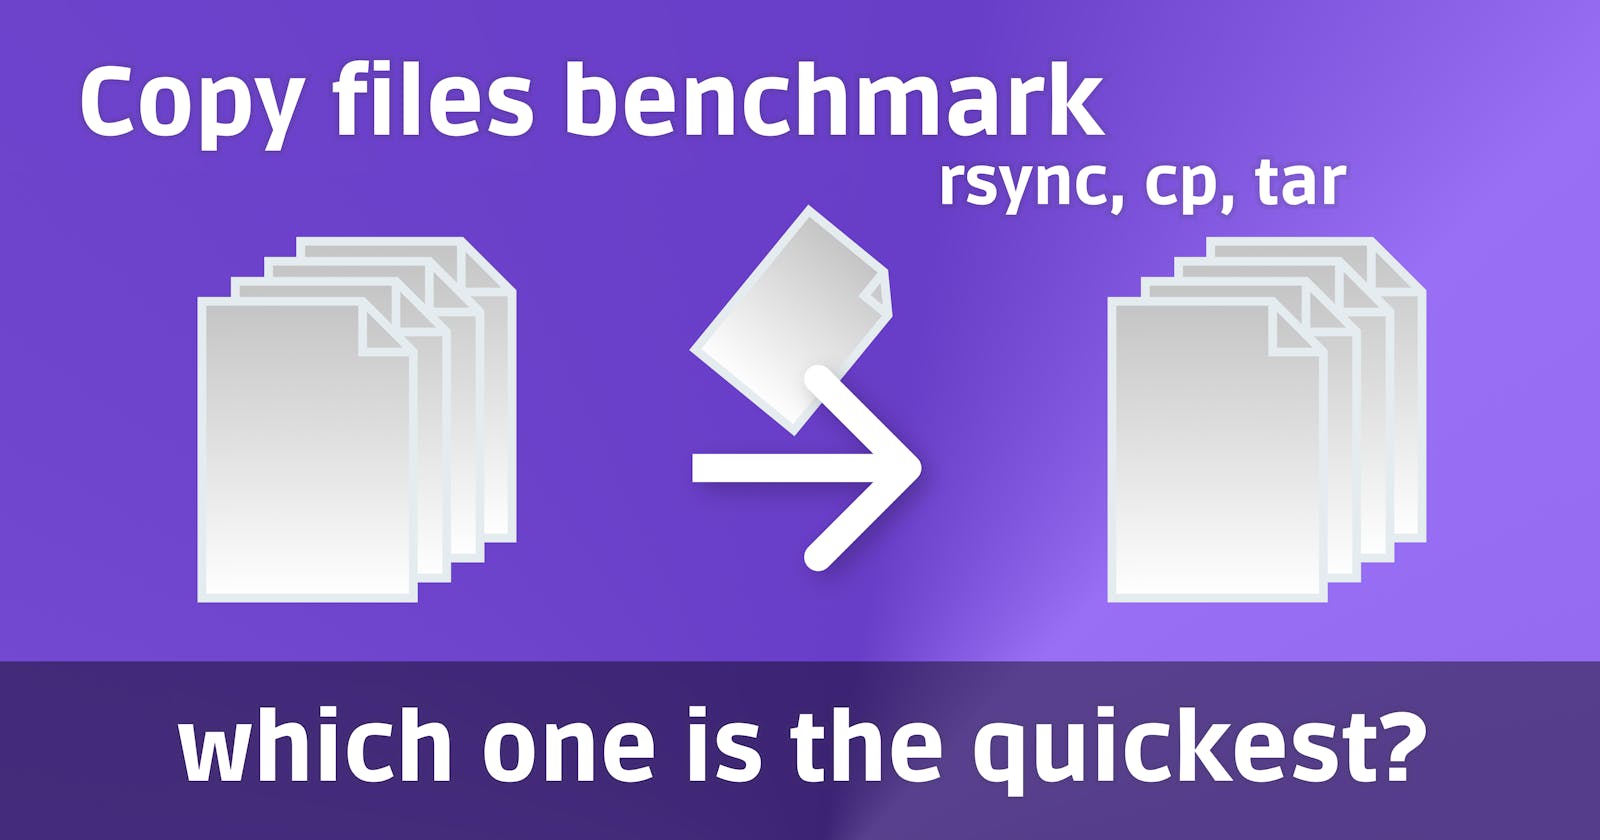 Benchmark - What is the quickest way to copy files?